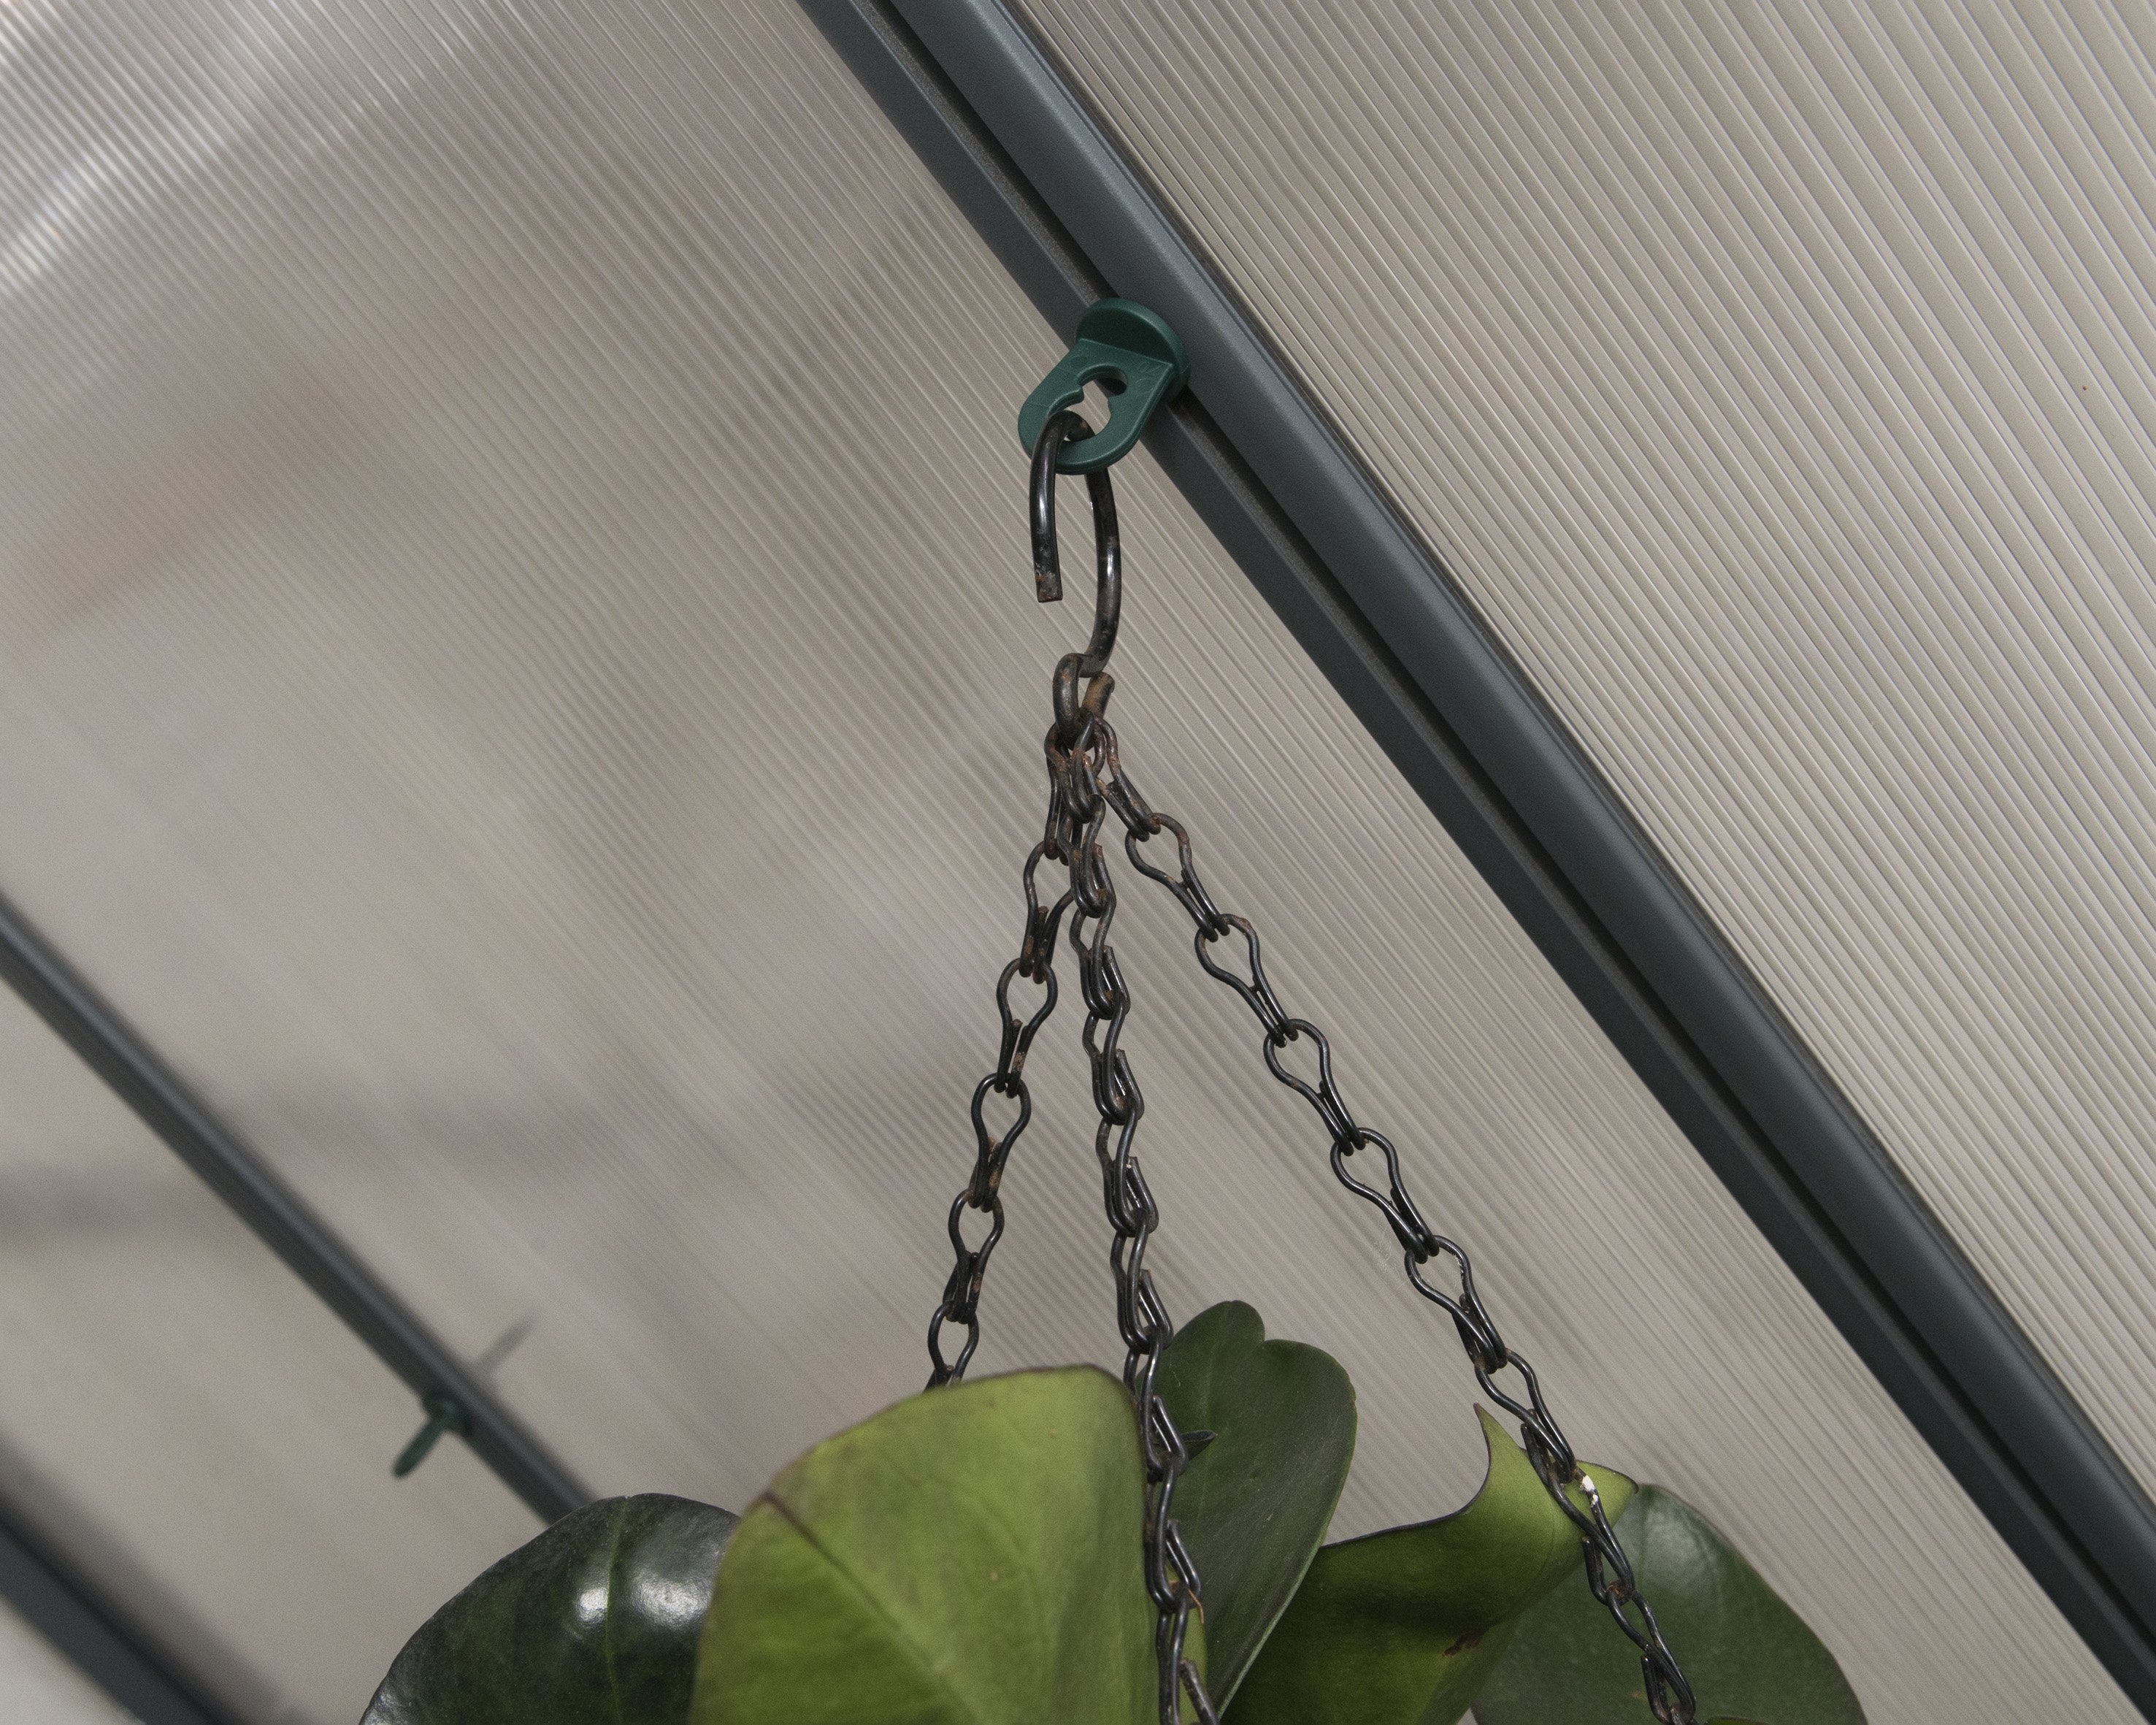 Plant Hangers for Palram-Canopia® Greenhouses - Dive To Garden